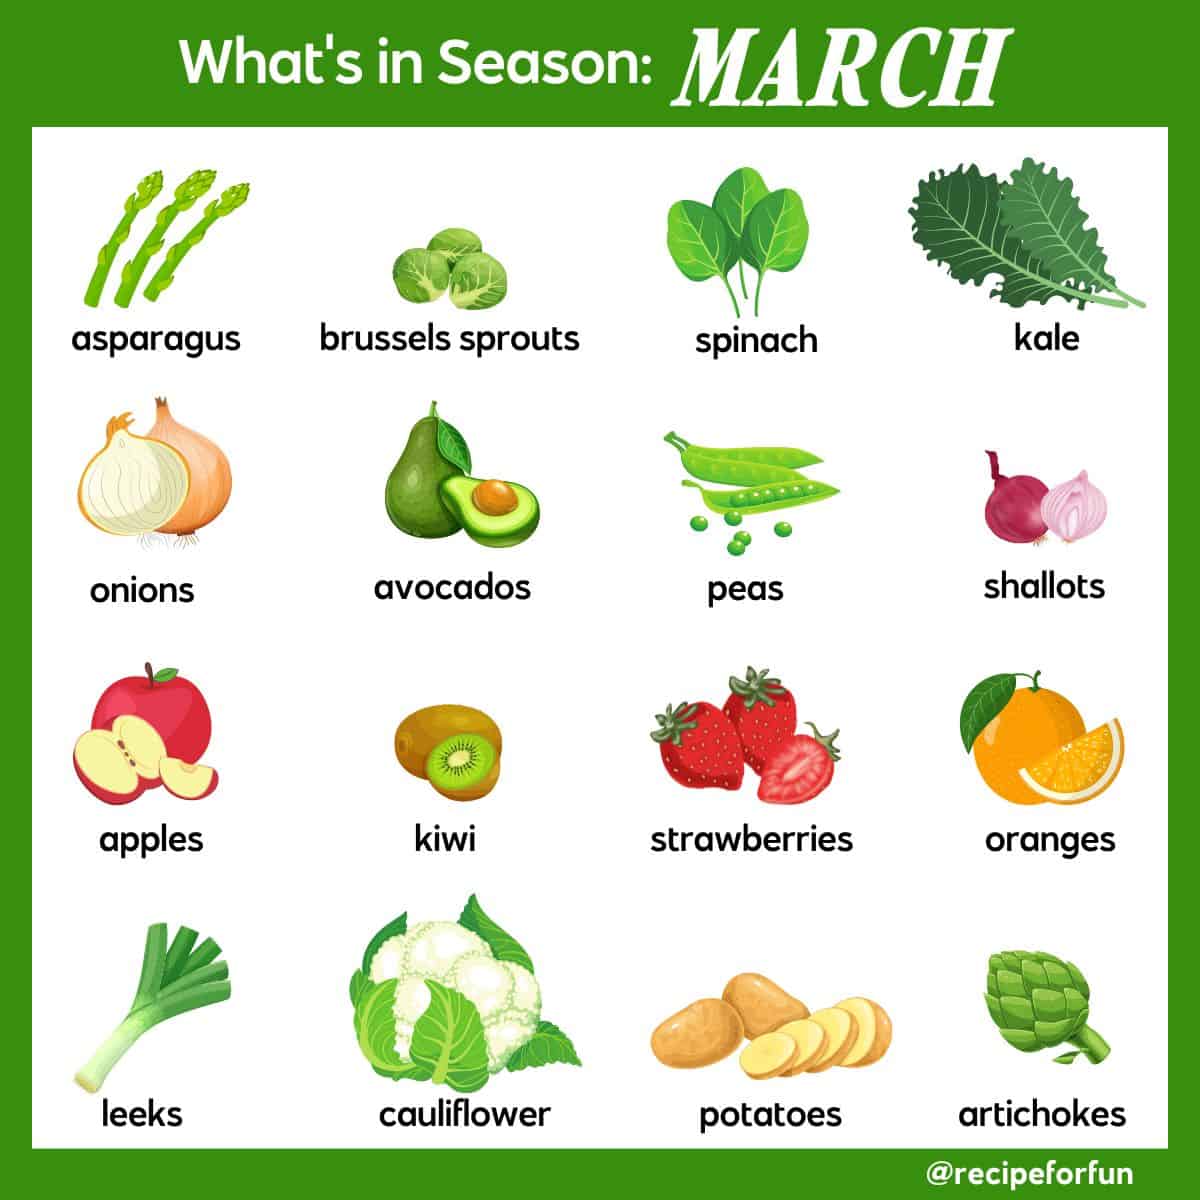 An illustrated infographic of what produce is in season in March.